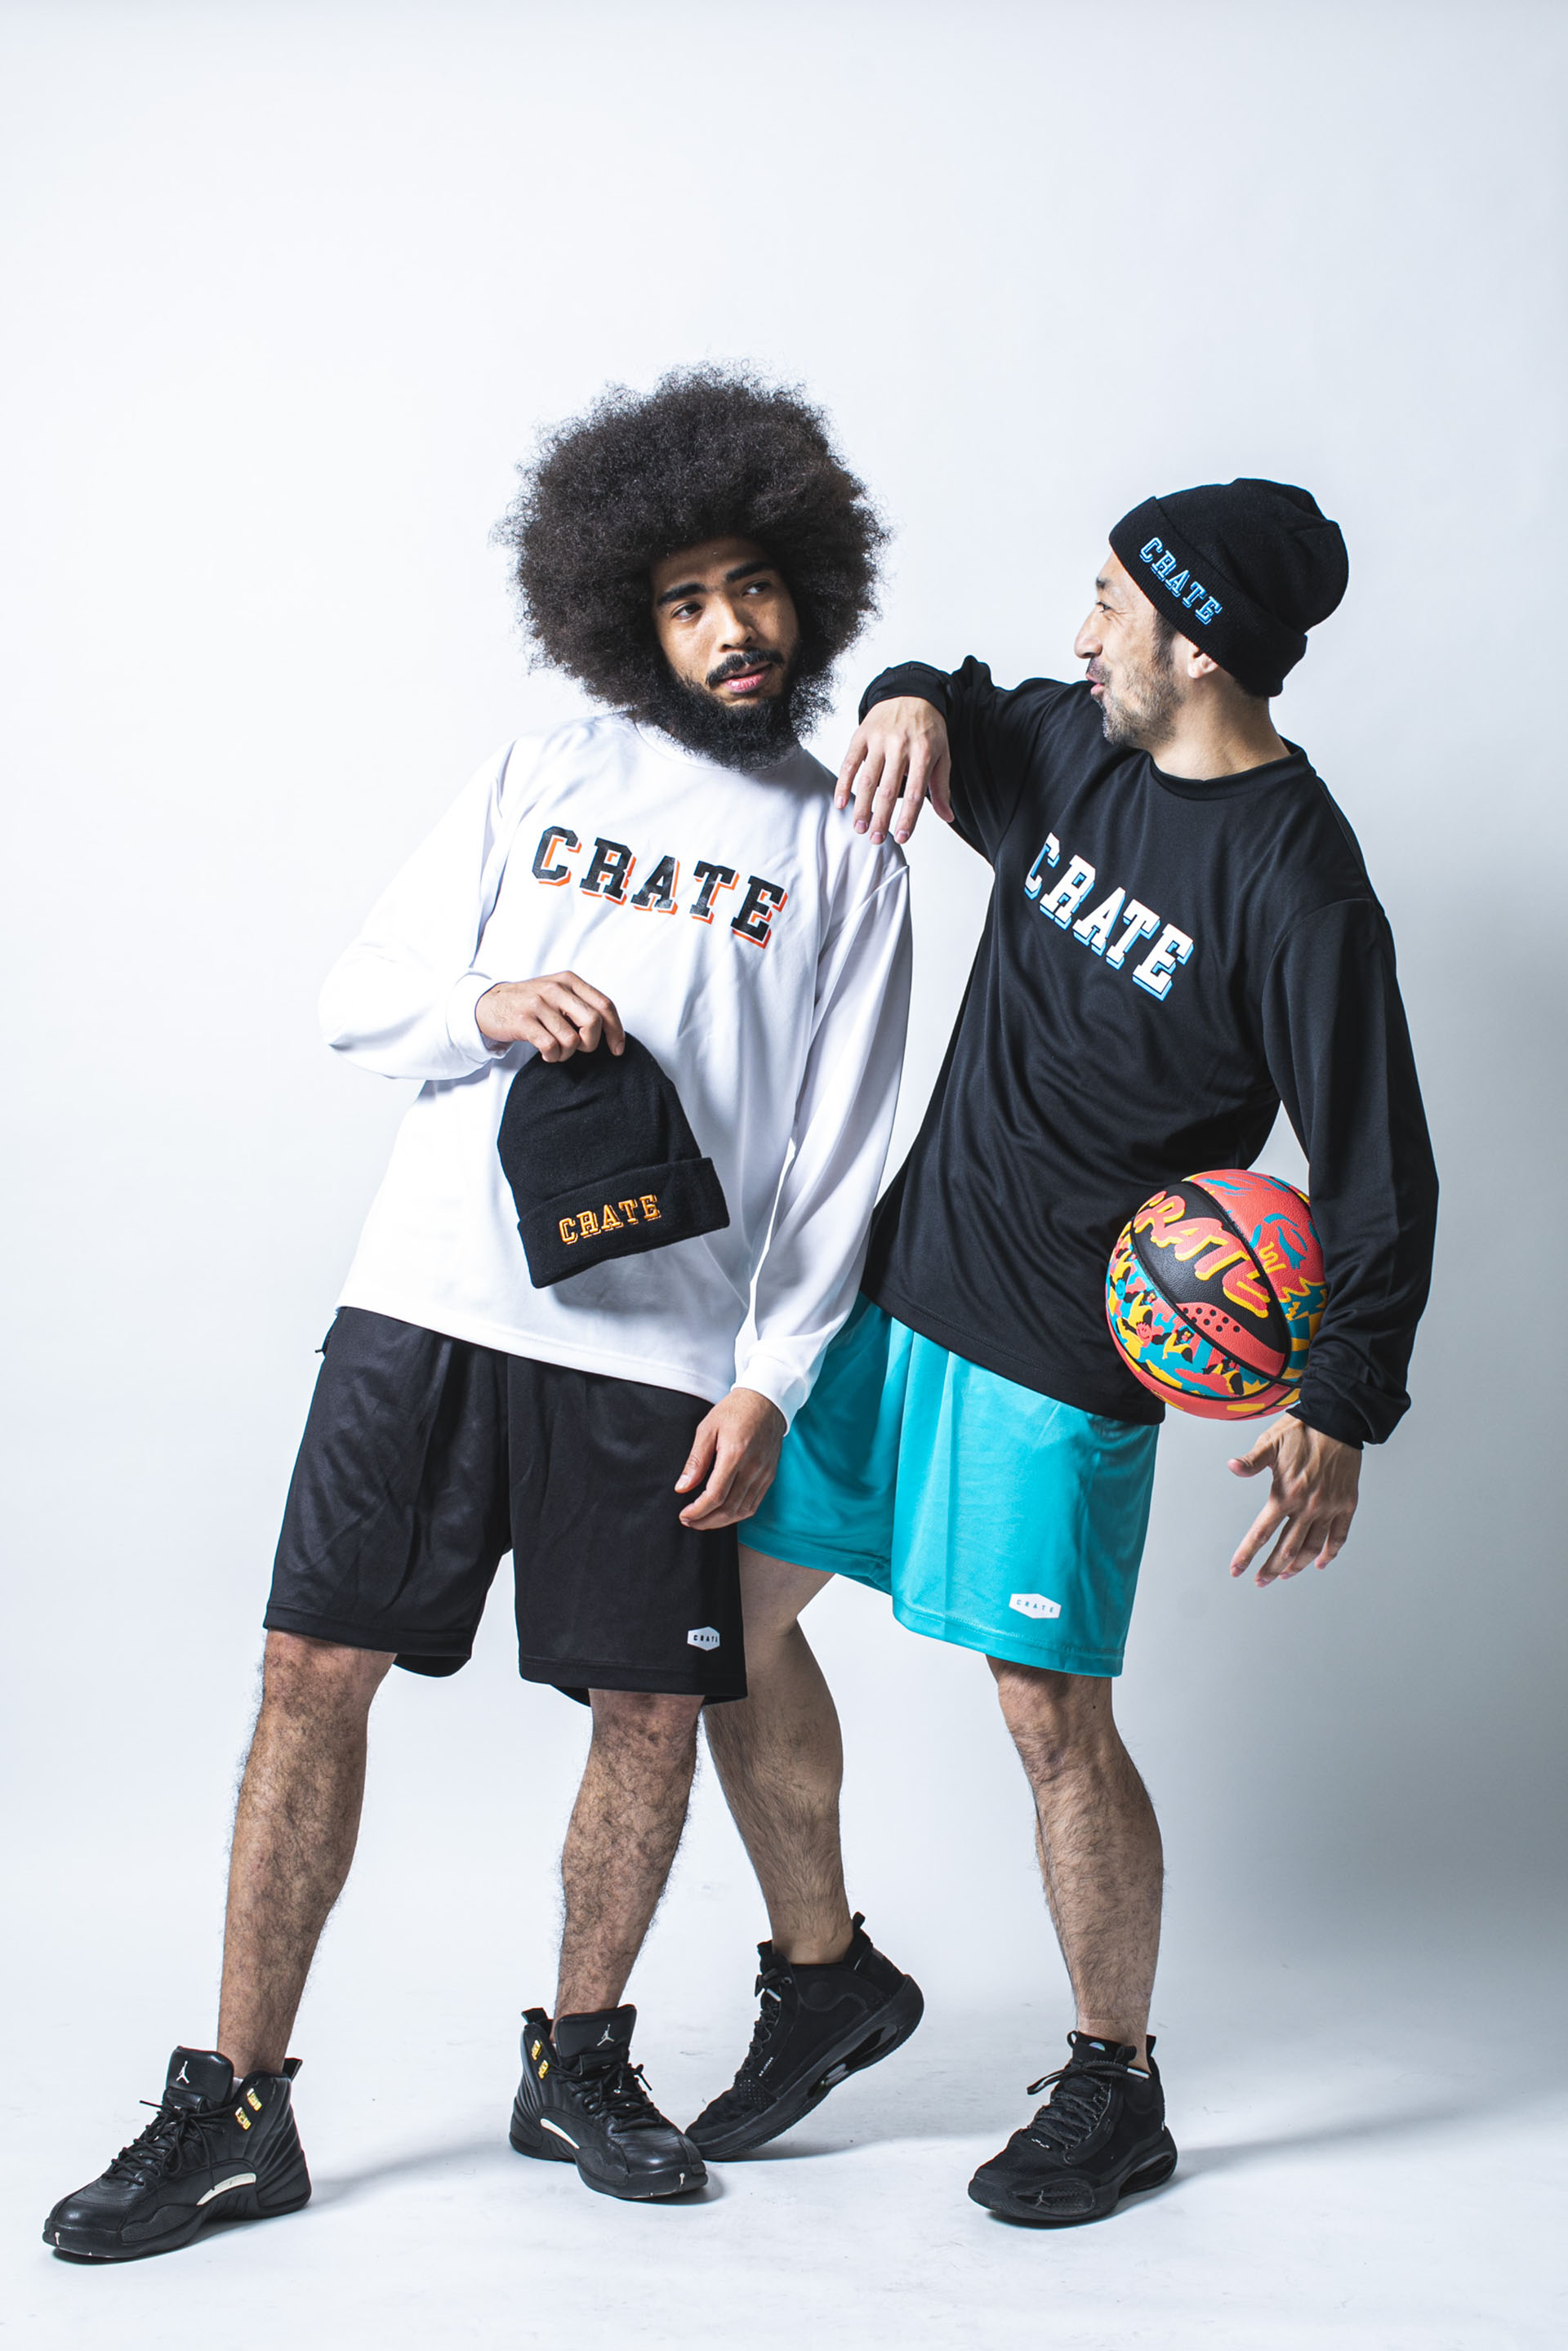 CRATEからナイロンセットアップが登場！ ｜ FLY BASKETBALL CULTURE